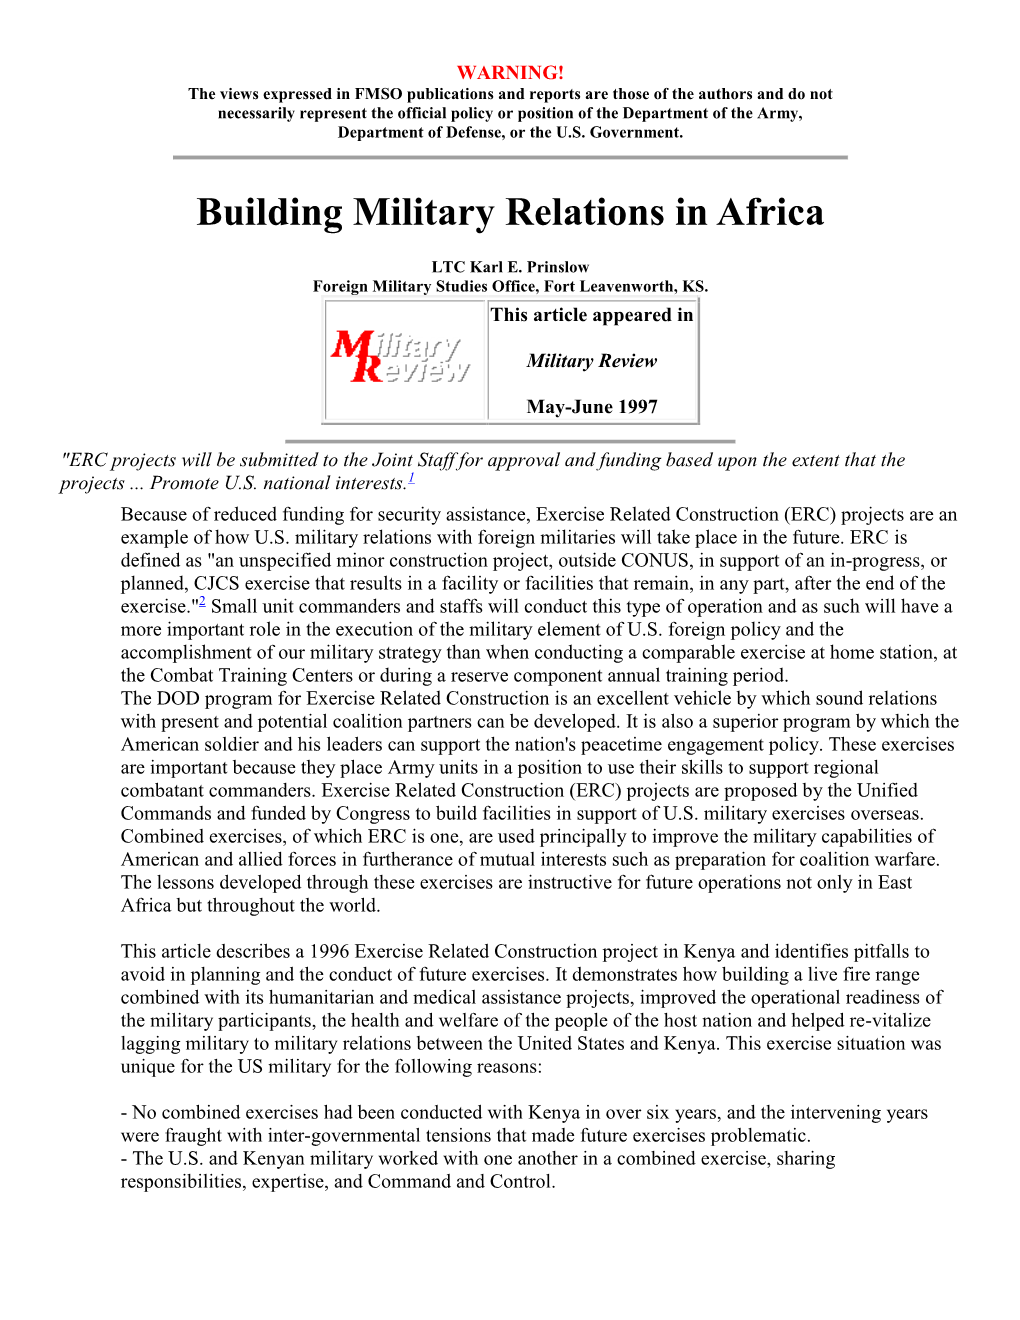 Building Military Relations in Africa